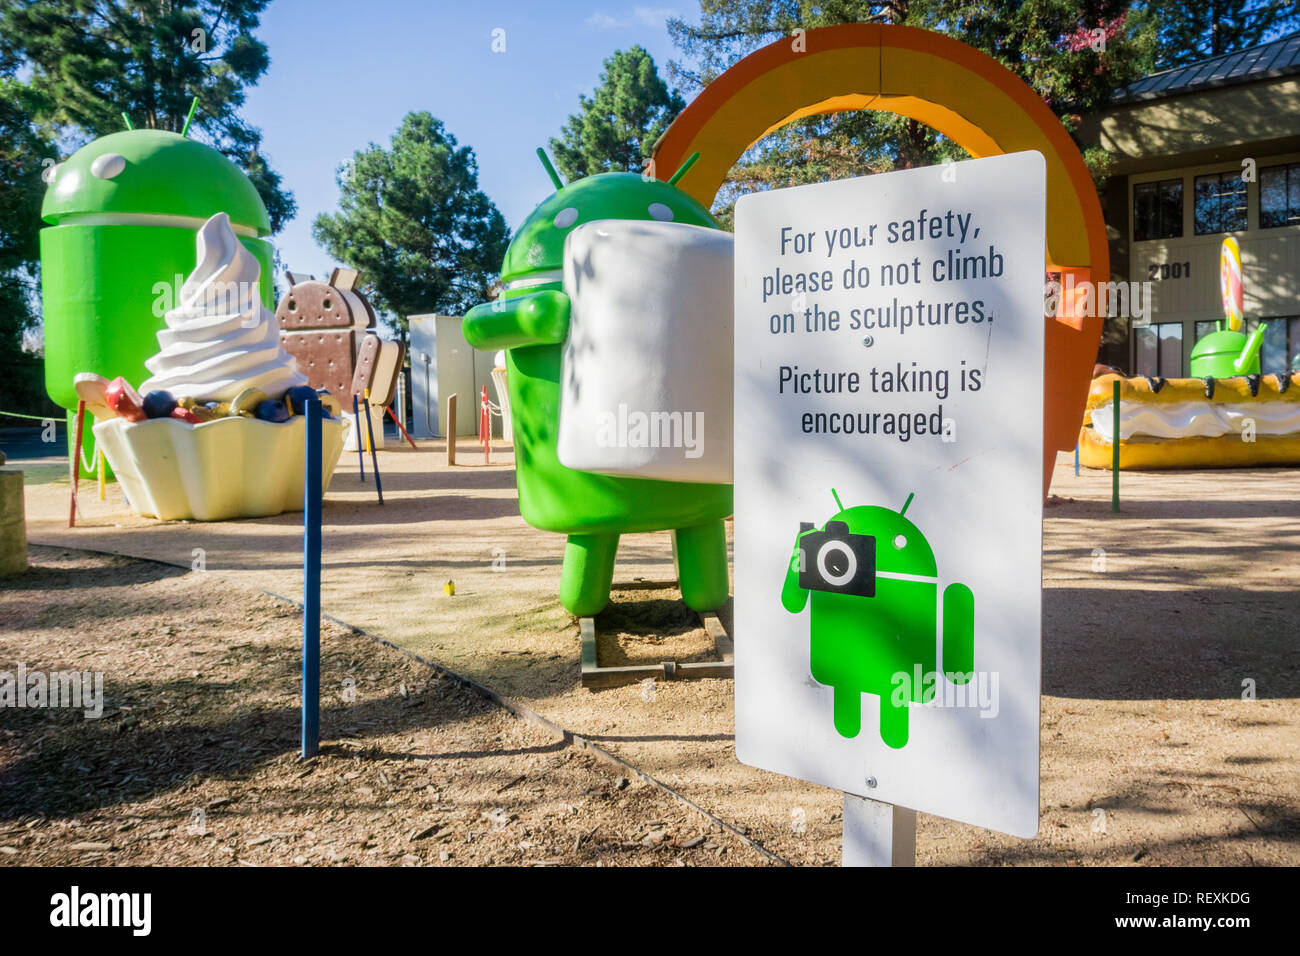 December 13, 2017 Mountain View / CA / USA - The Android Lawn Statues represent a photo opportunity in the Google office campus located in Silicon Val Stock Photo